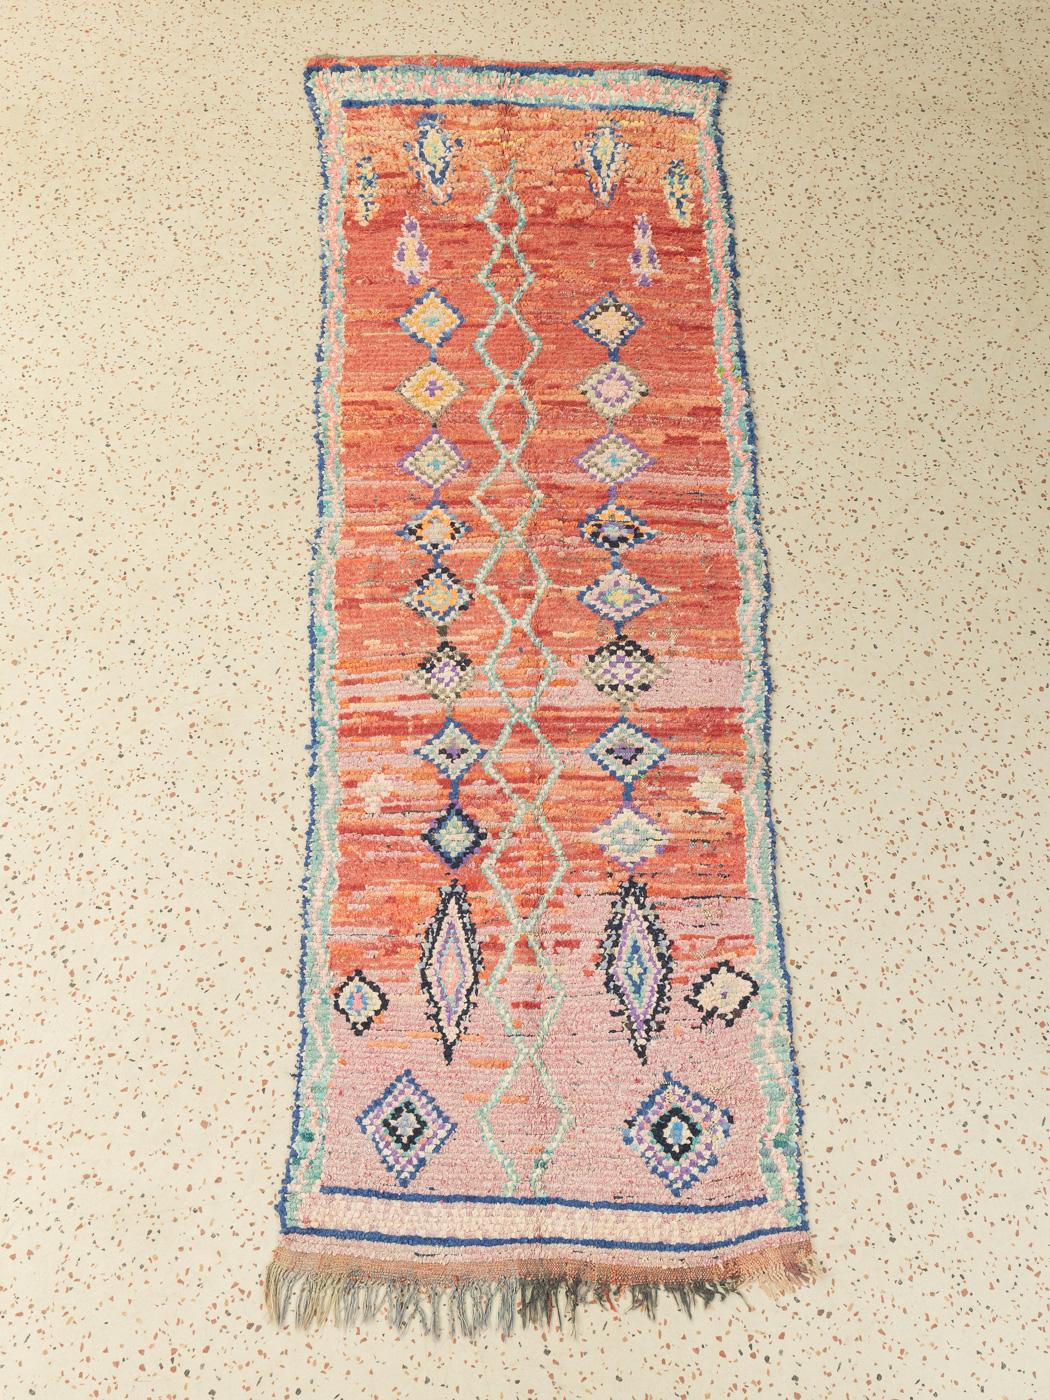 Hand-Crafted Vintage Azilal Moroccan Berber Rug HightAtlas Mountains apricot rosé blue Runner For Sale